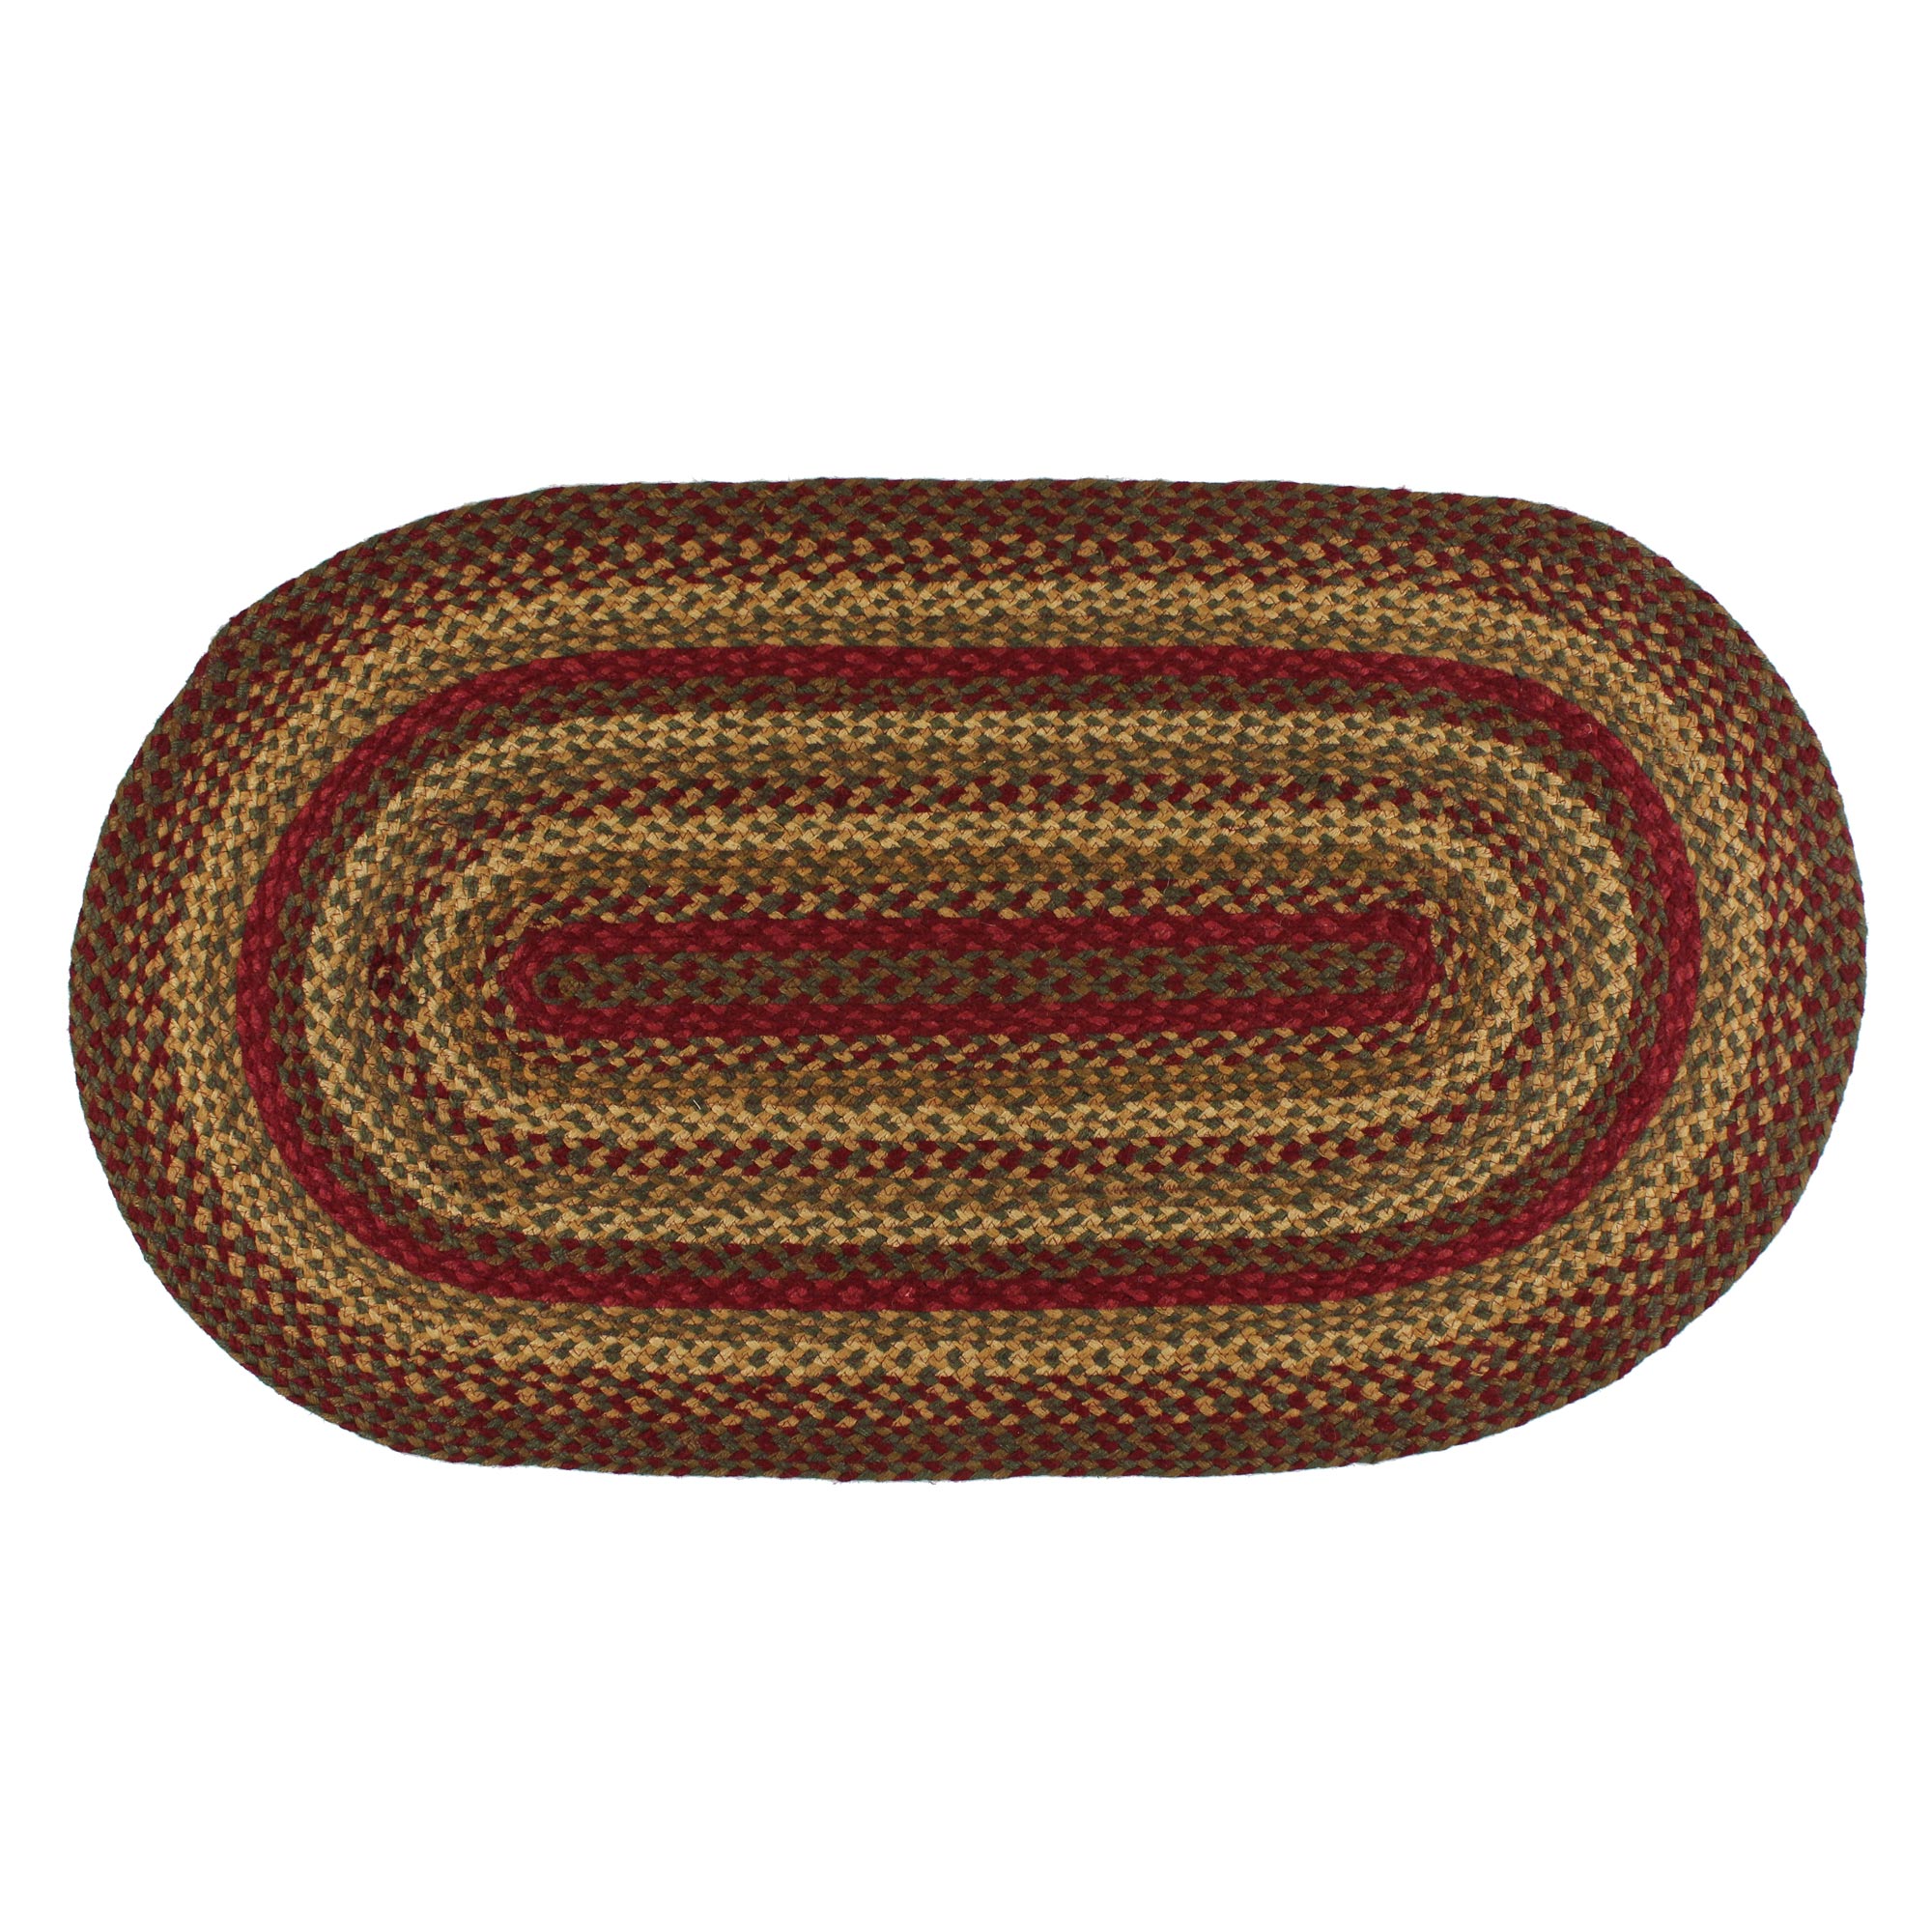 braided rugs red and green braided jute area rug country rustic oval rectangle YRZYRCX